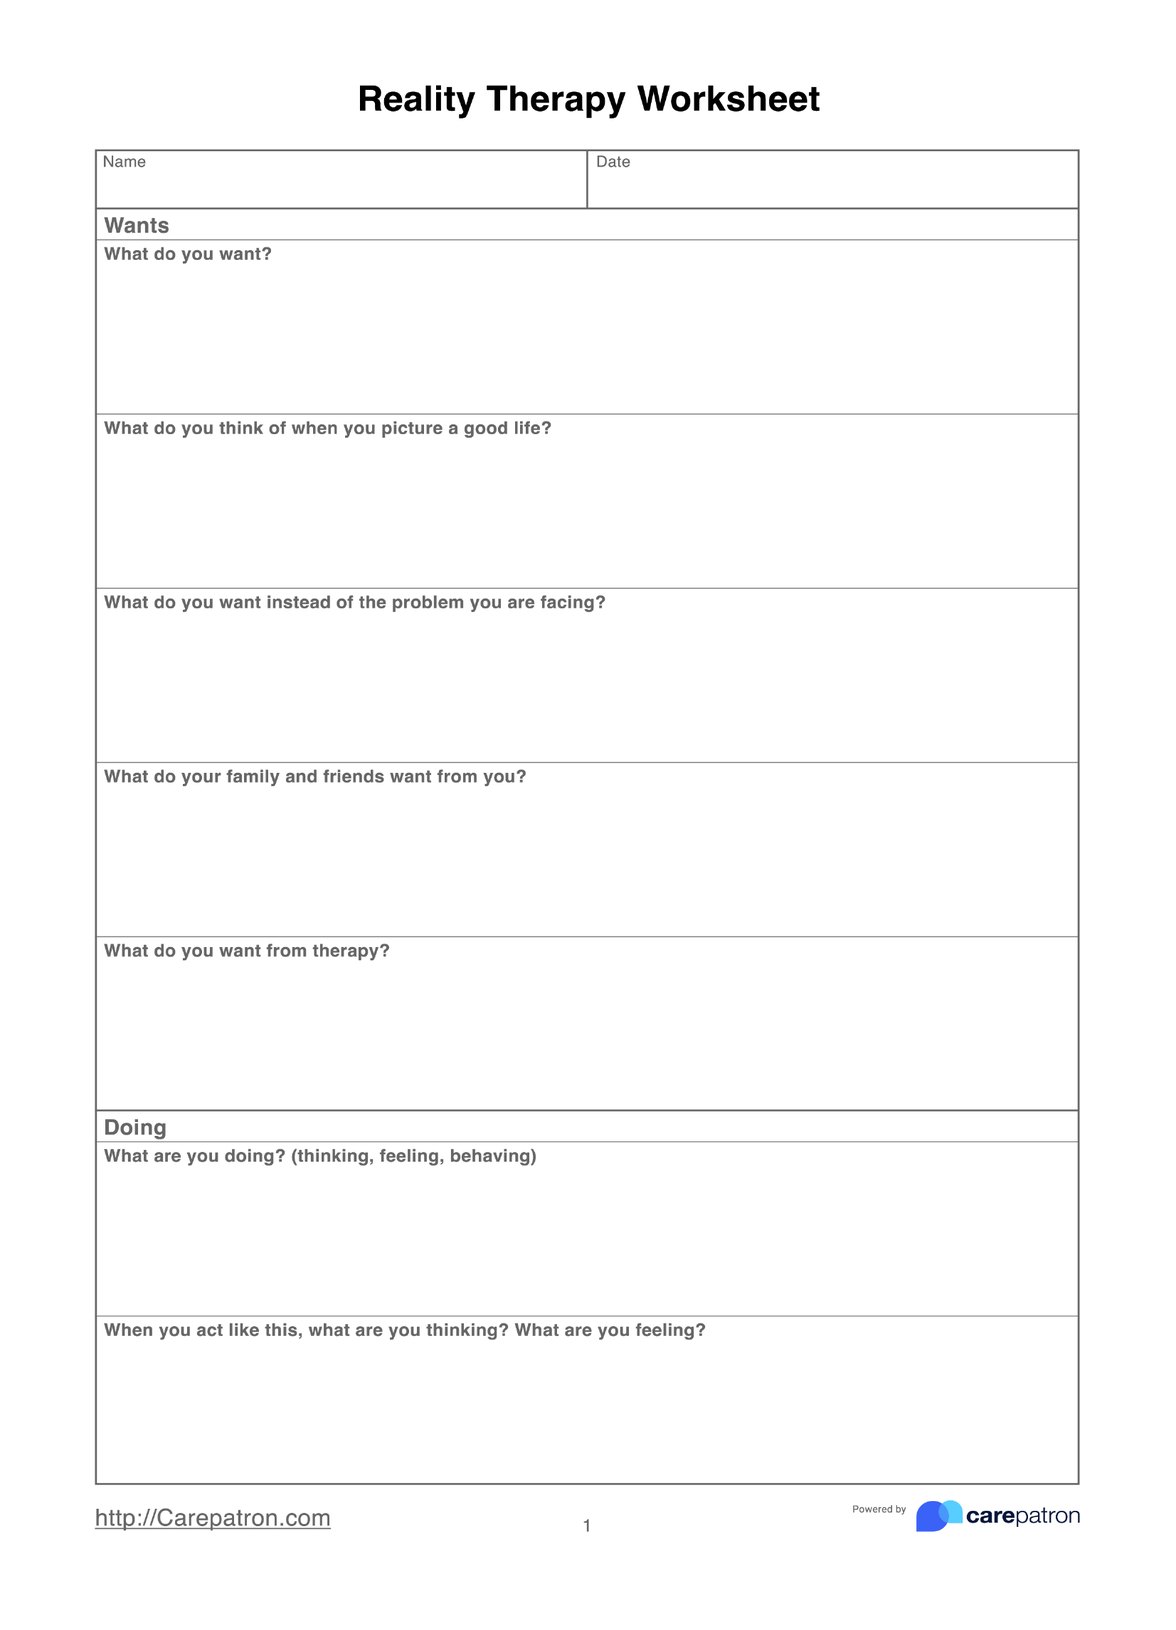 Reality Therapy Worksheets PDF Example